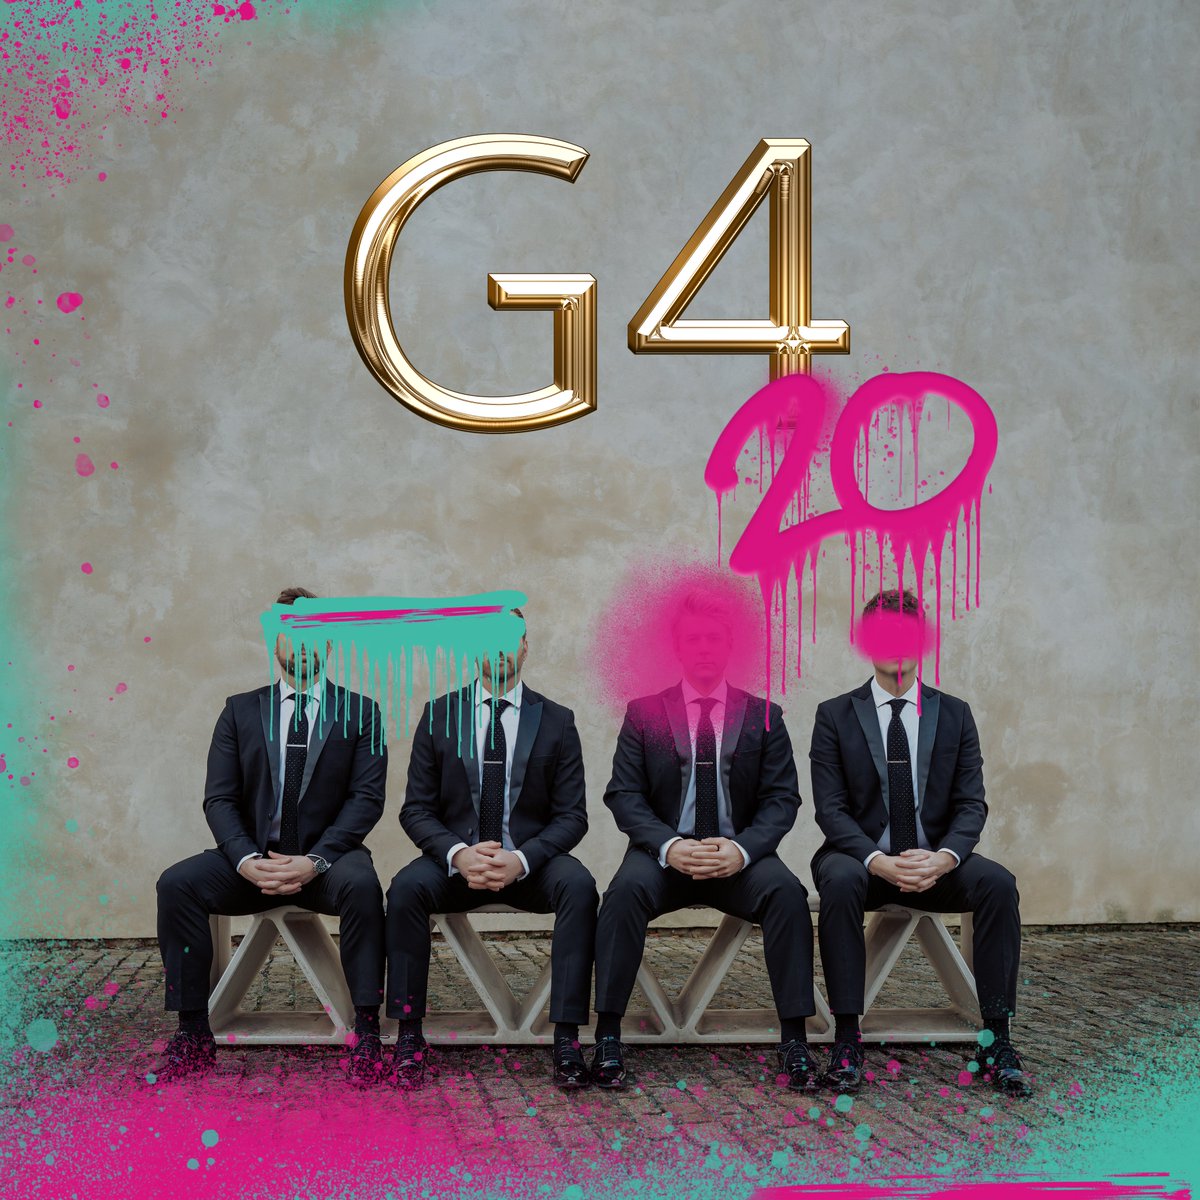 New Album #G420 Out Now! Please SHARE & let us know what you think of the album in the comments below Download on @iTunes music.apple.com/gb/album/g4-20… Download on @amazonmusic amazon.co.uk/dp/B0CYWK9QH4?… Stream on @Spotify open.spotify.com/album/7biCEham… Stream on @Deezer deezer.com/en/album/56379…